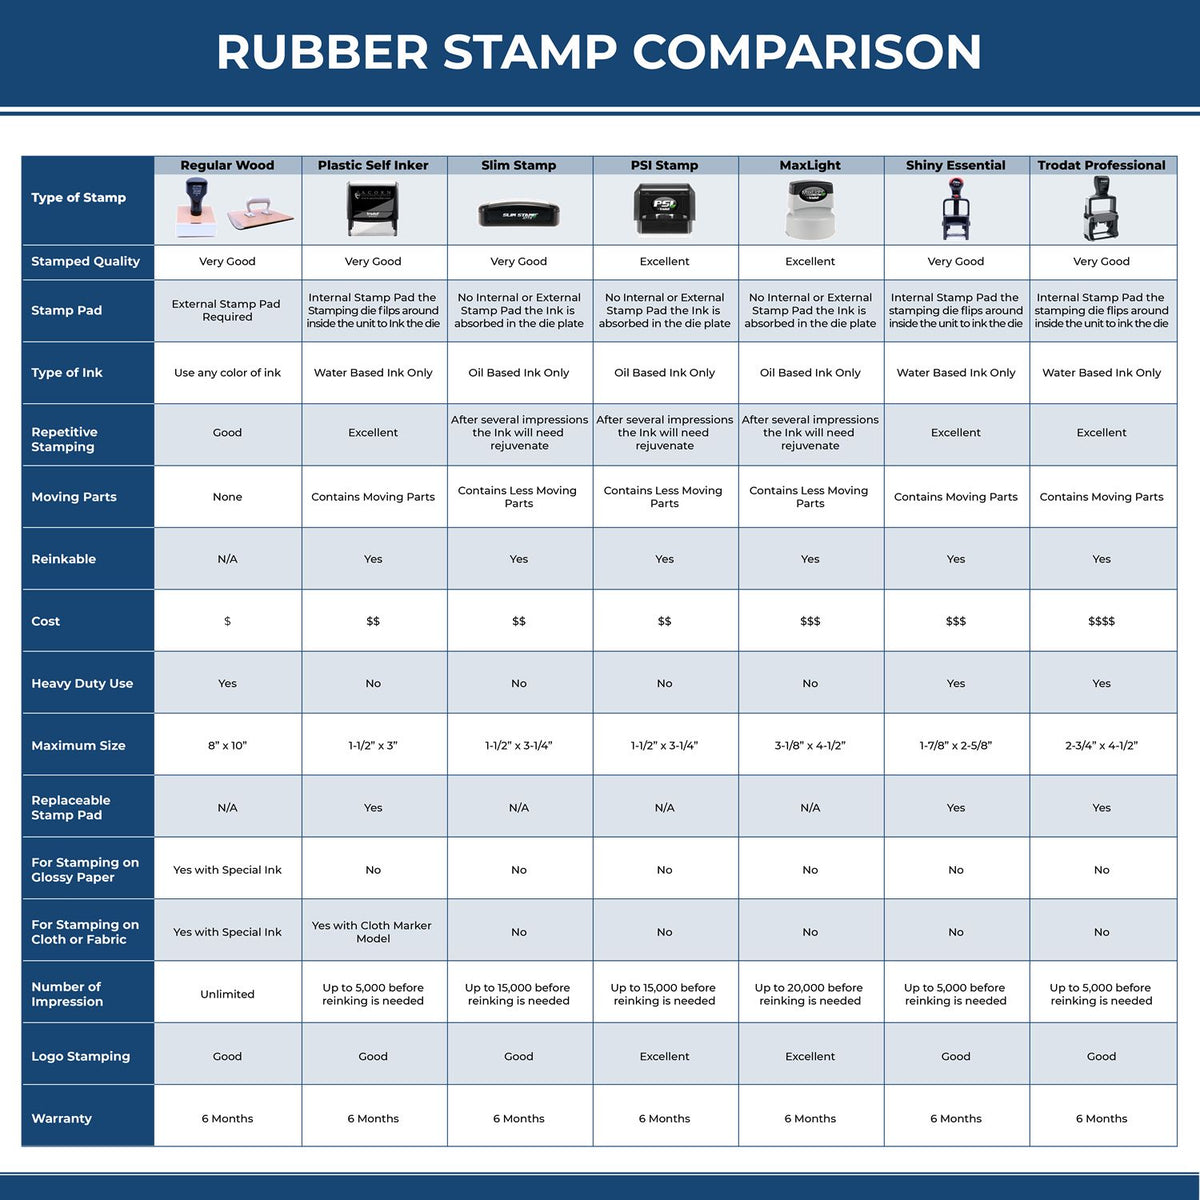 A comparison chart for the different types of mount models available for the Premium MaxLight Pre-Inked Mississippi Landscape Architectural Stamp.